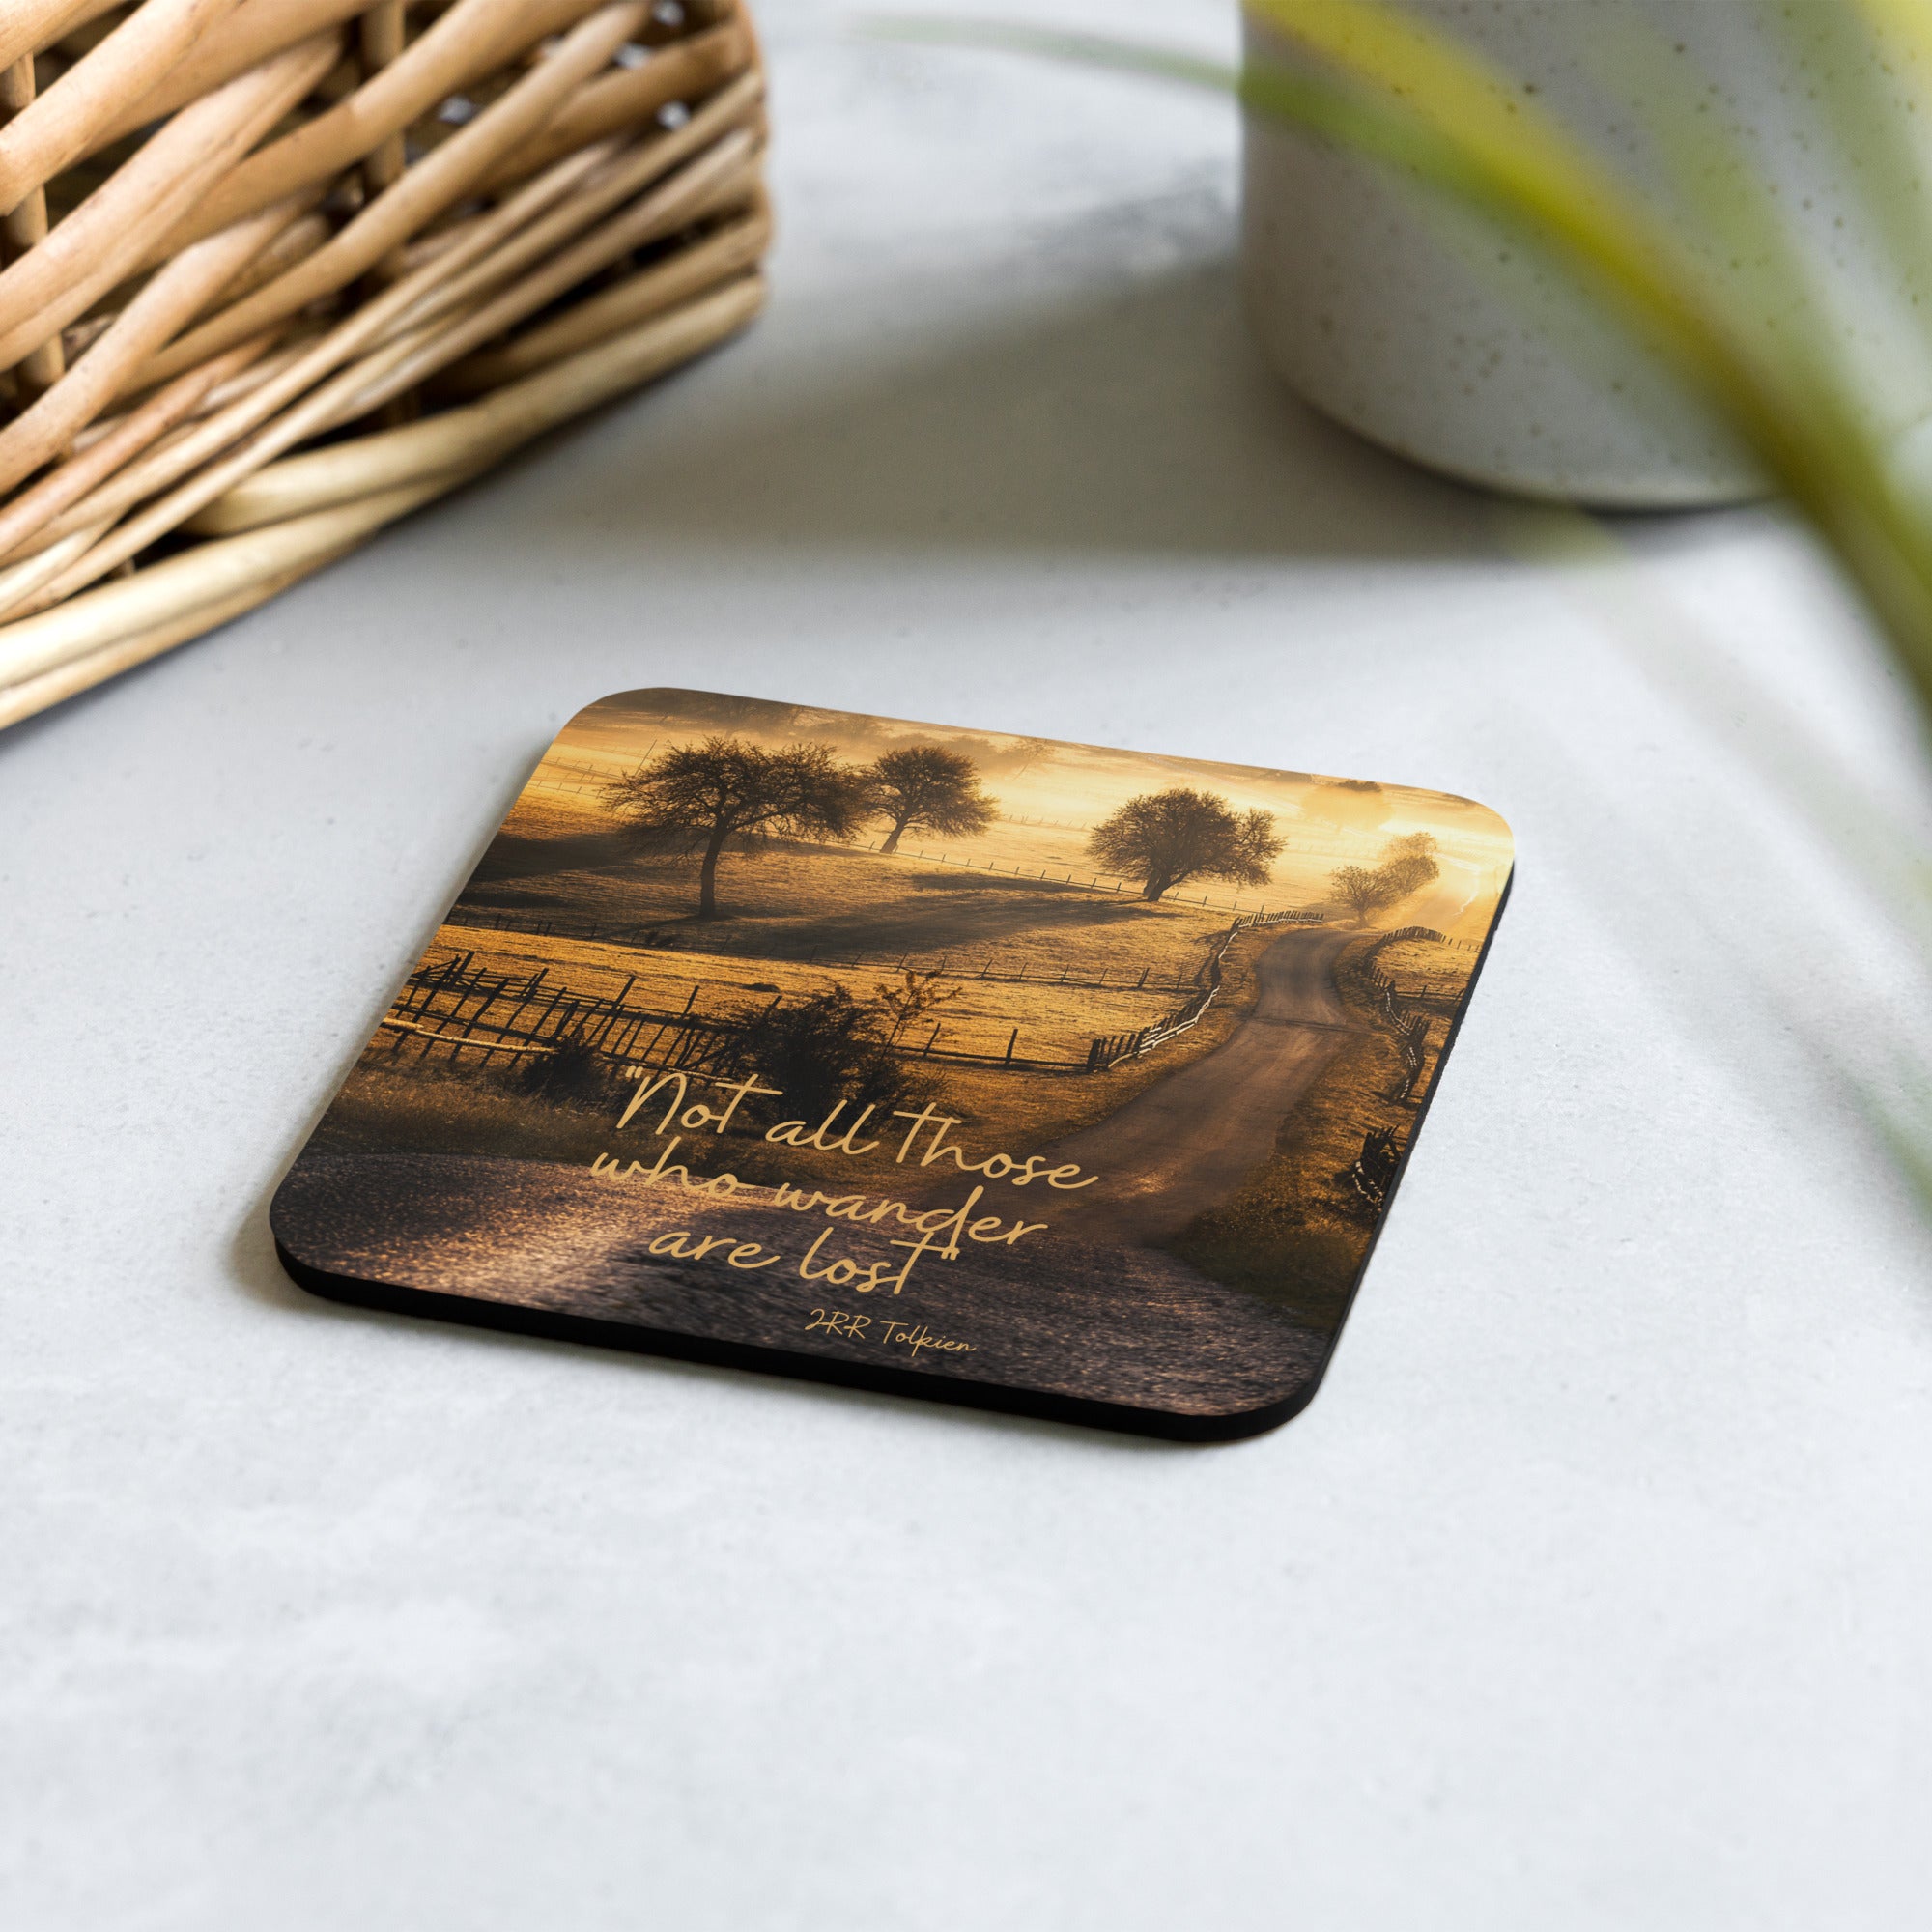 Not All Those Who Wander Are Lost (JRR Tolkien) - Cork-back coaster